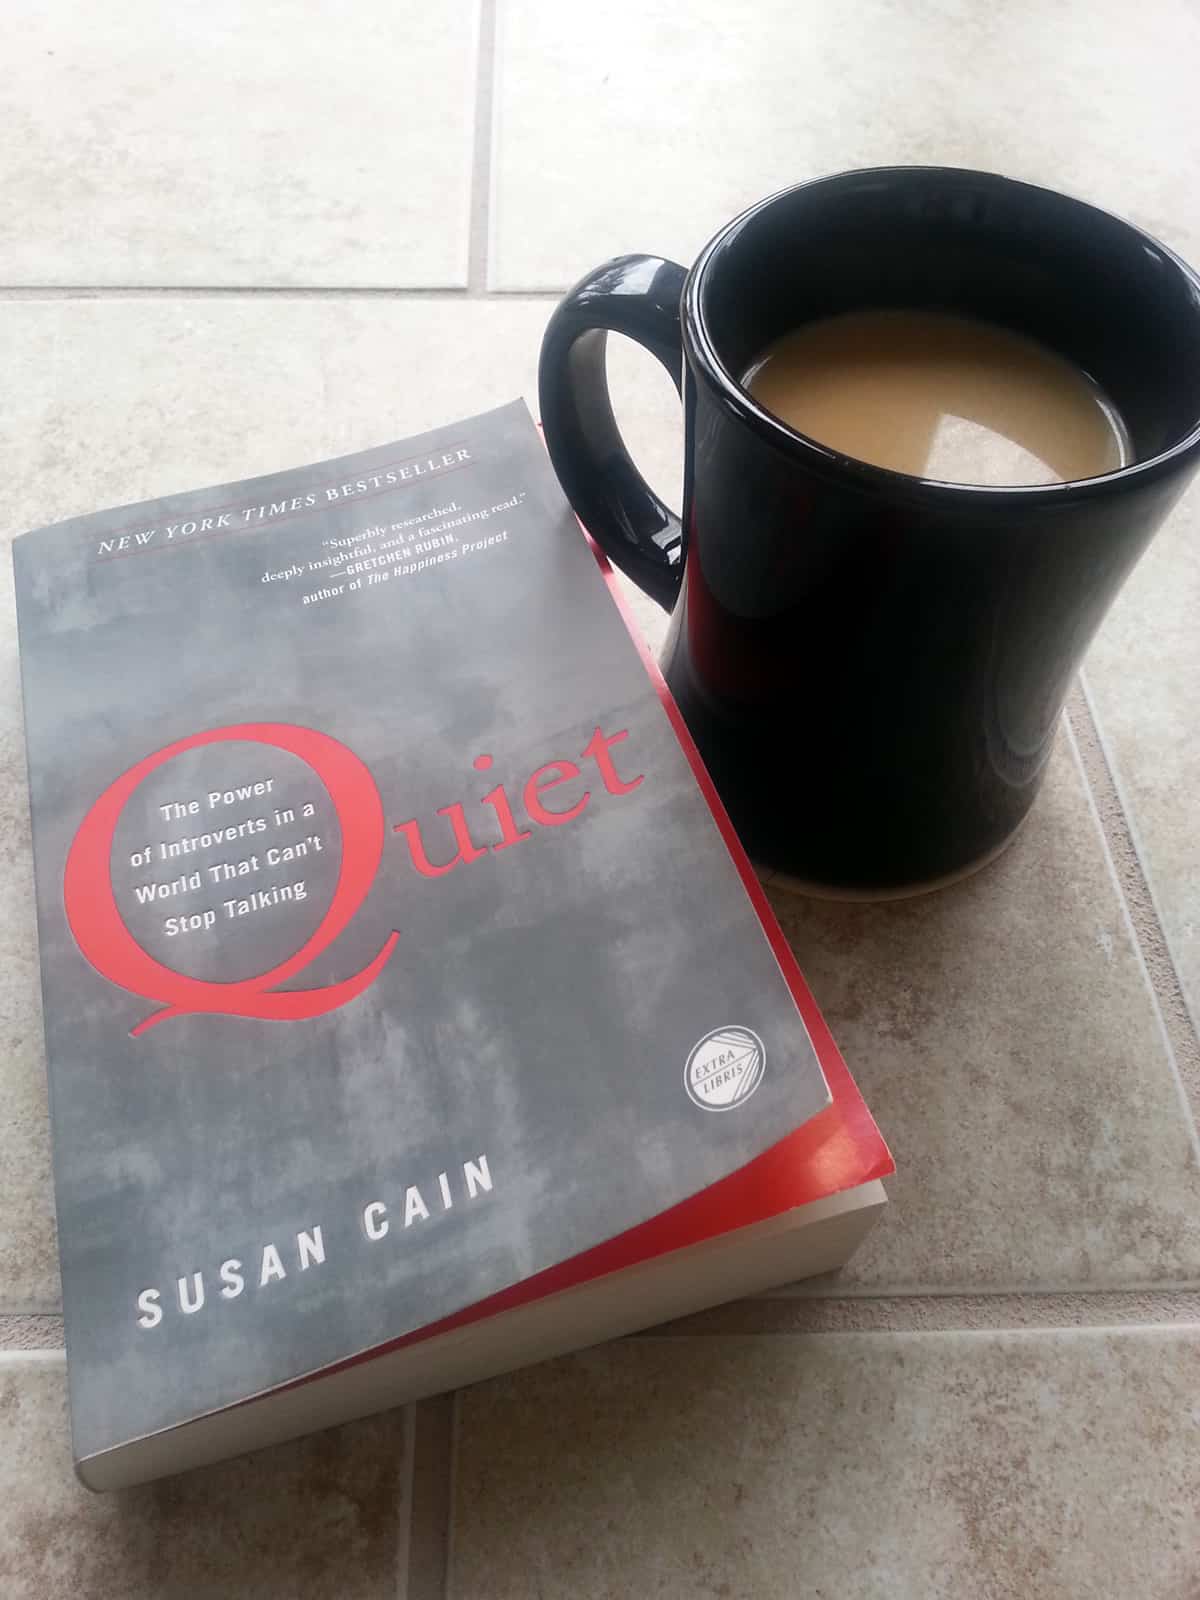 A close-up of a book by Susan Cain entitled Quiet: The Power of Introverts in a World That Can’t Stop Talking next to a cup of coffee.